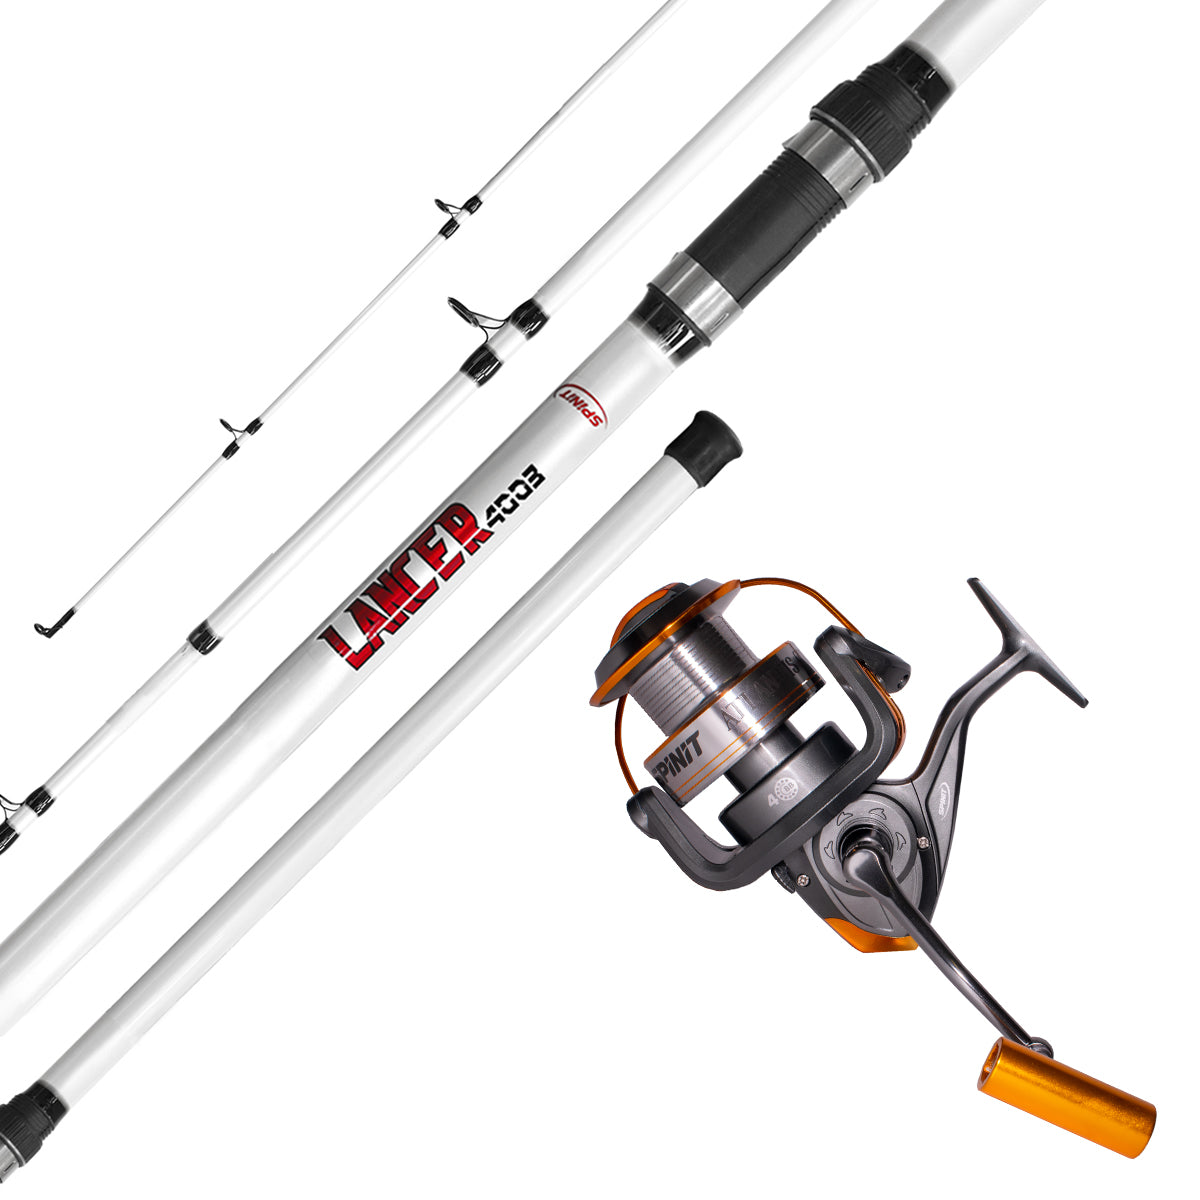 Caña Surfcasting Spinit Lancer 4 Mts 3 Tramos Frontal